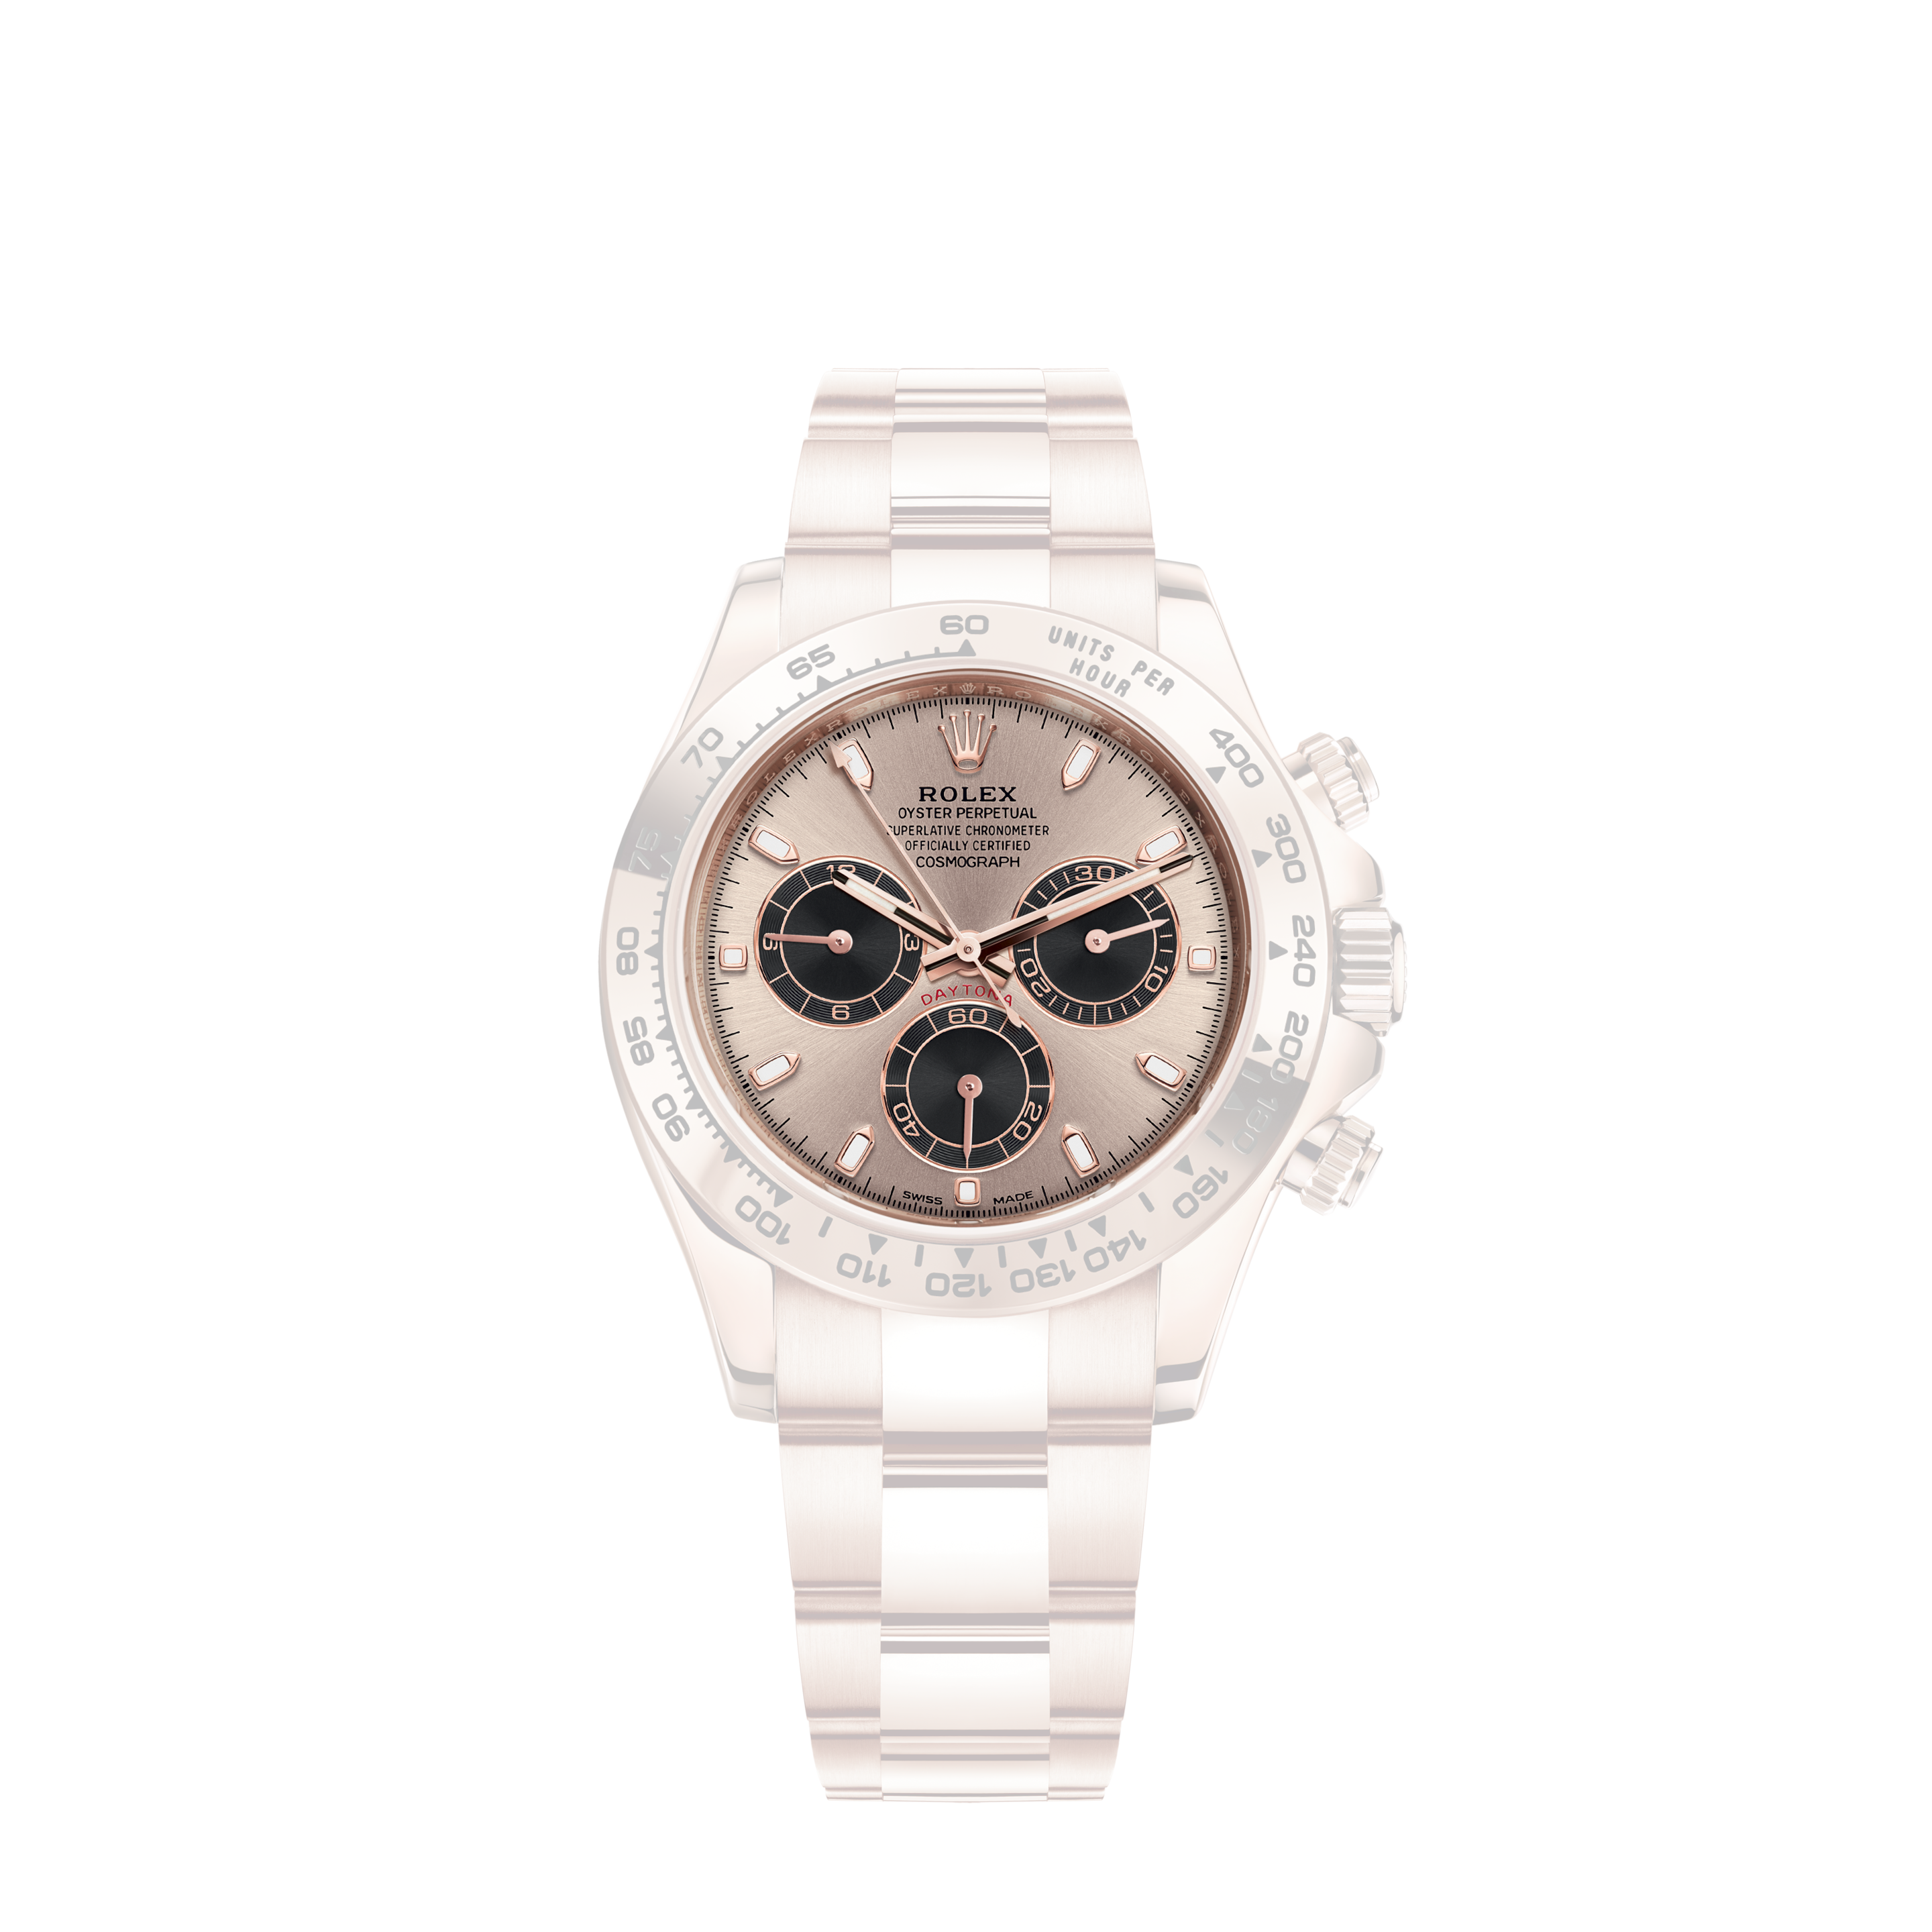 Rolex Oyster Perpetual Datejust 36mm Pearl Dial with Diamond Numbers Jubilee Band 16013 Diamond Bezel